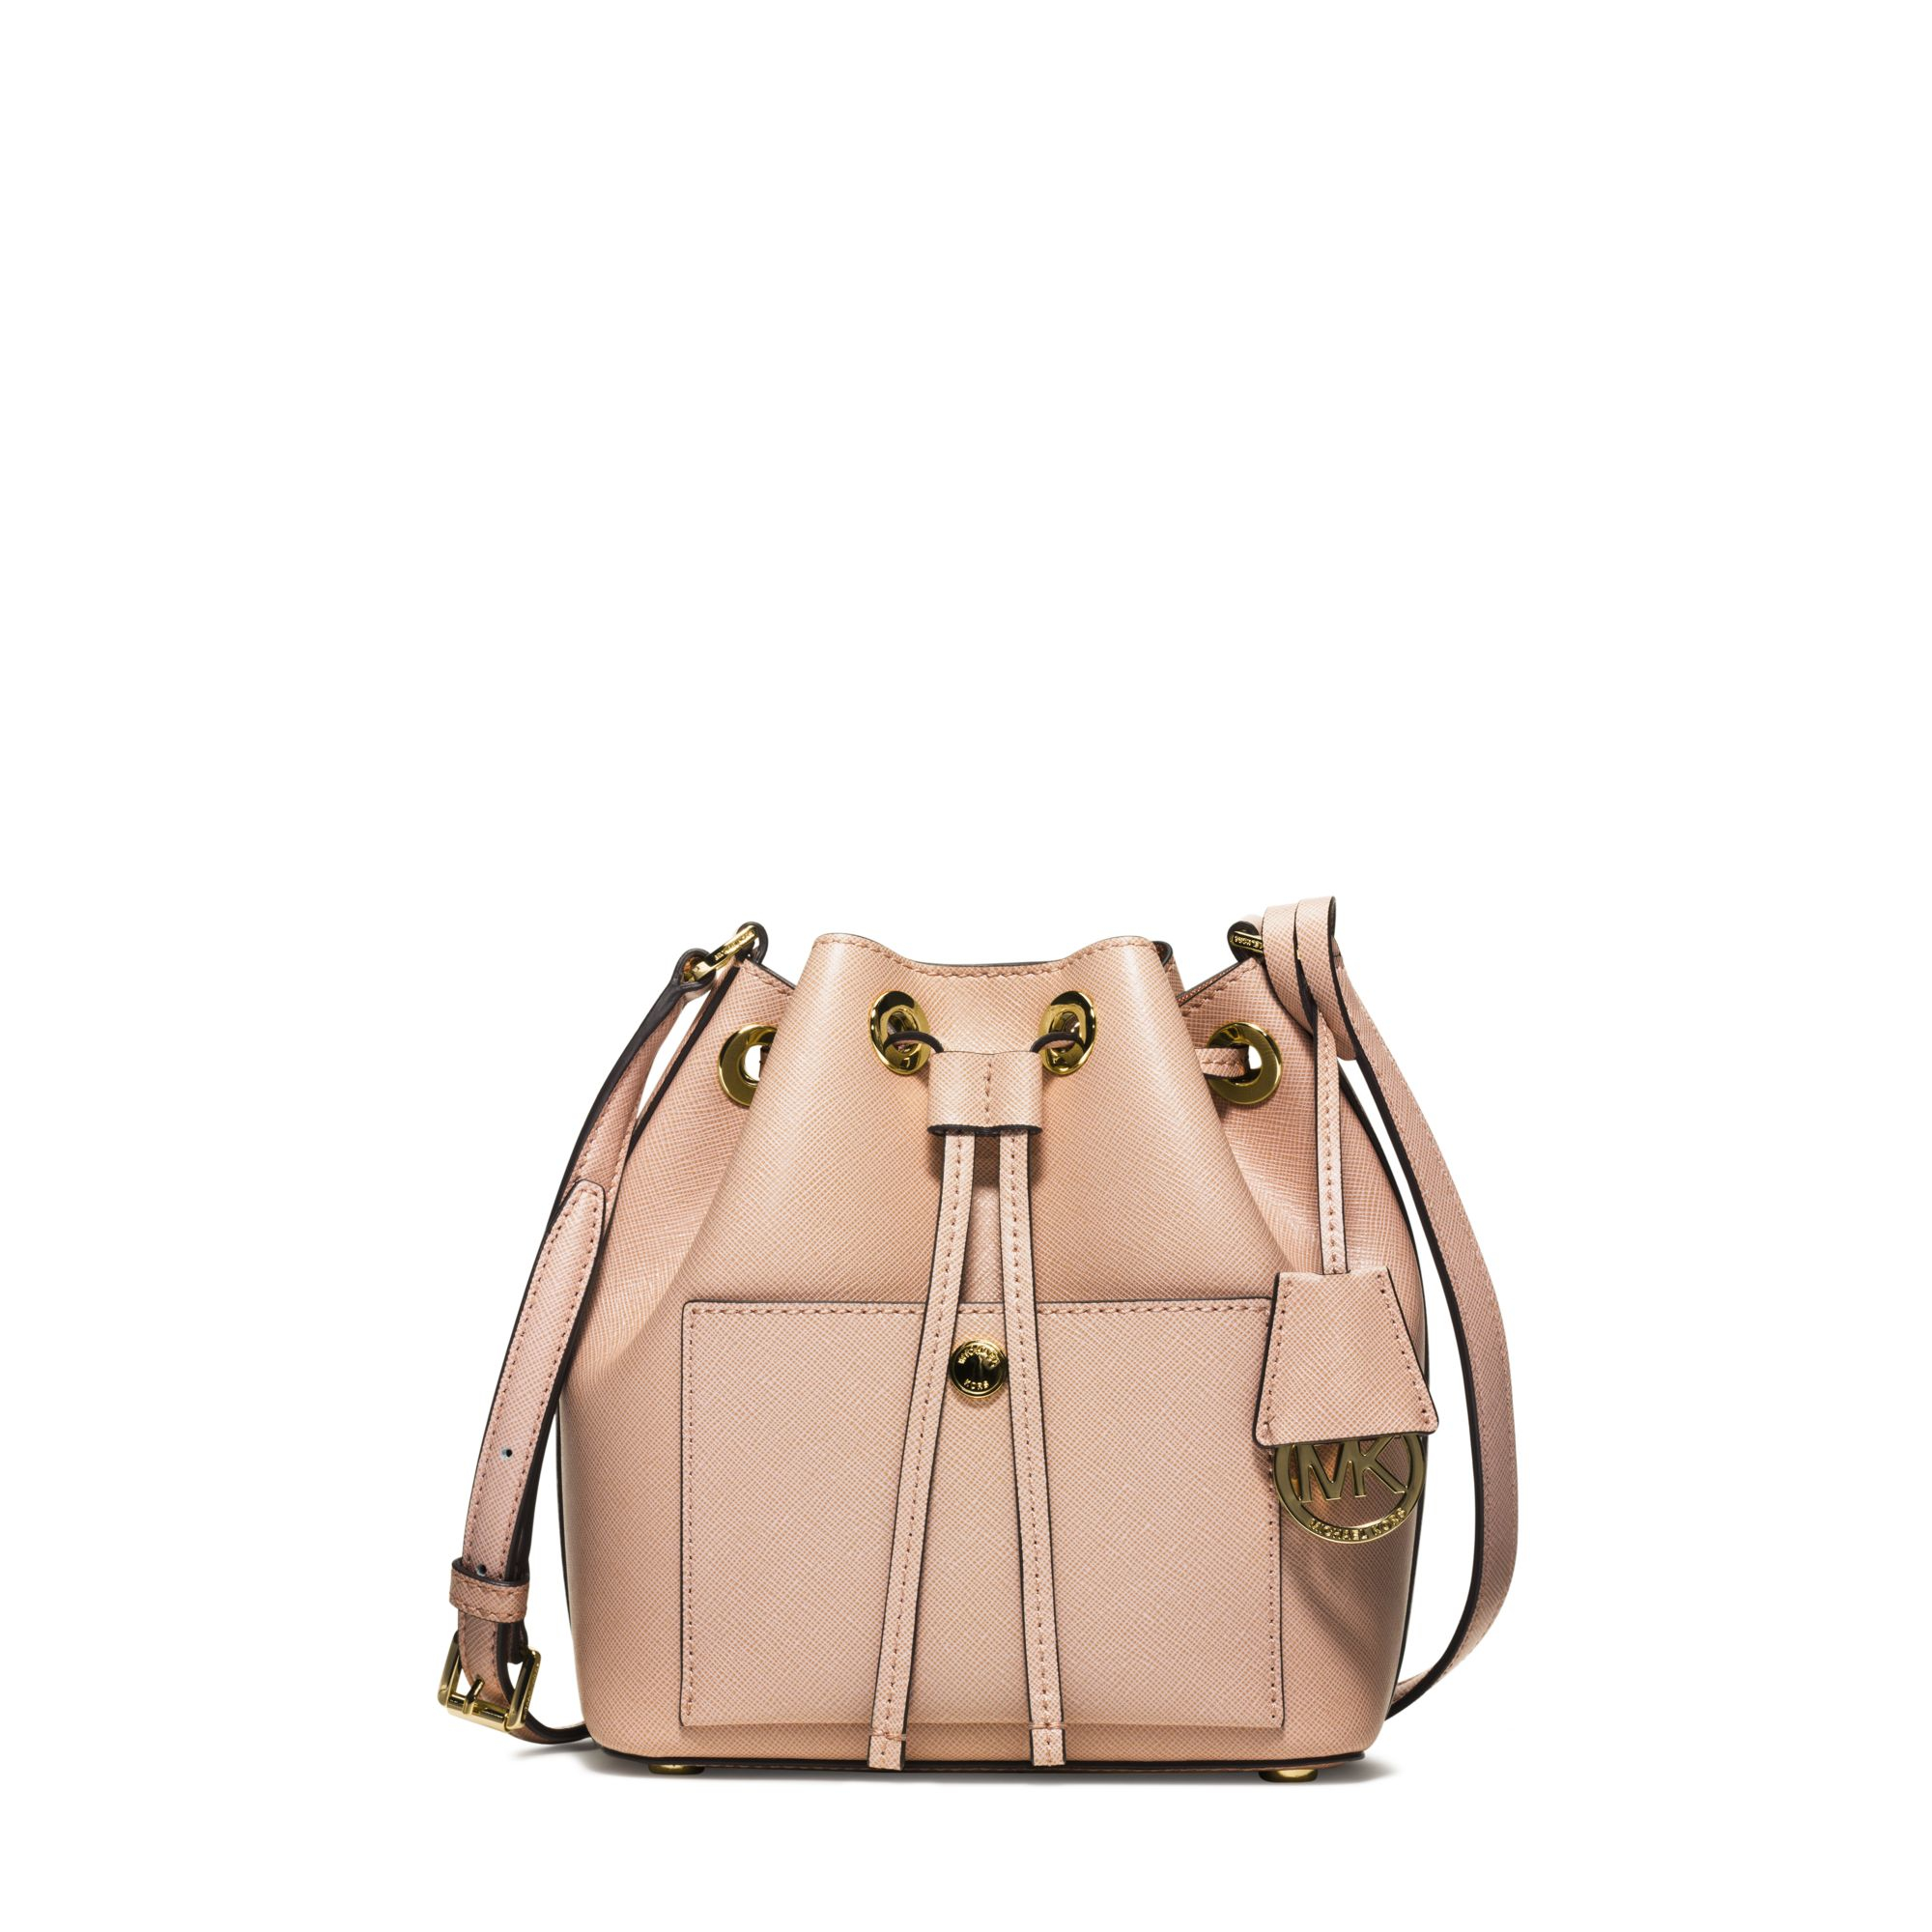 Lyst - Michael Kors Greenwich Saffiano-Leather Bucket Bag in Pink